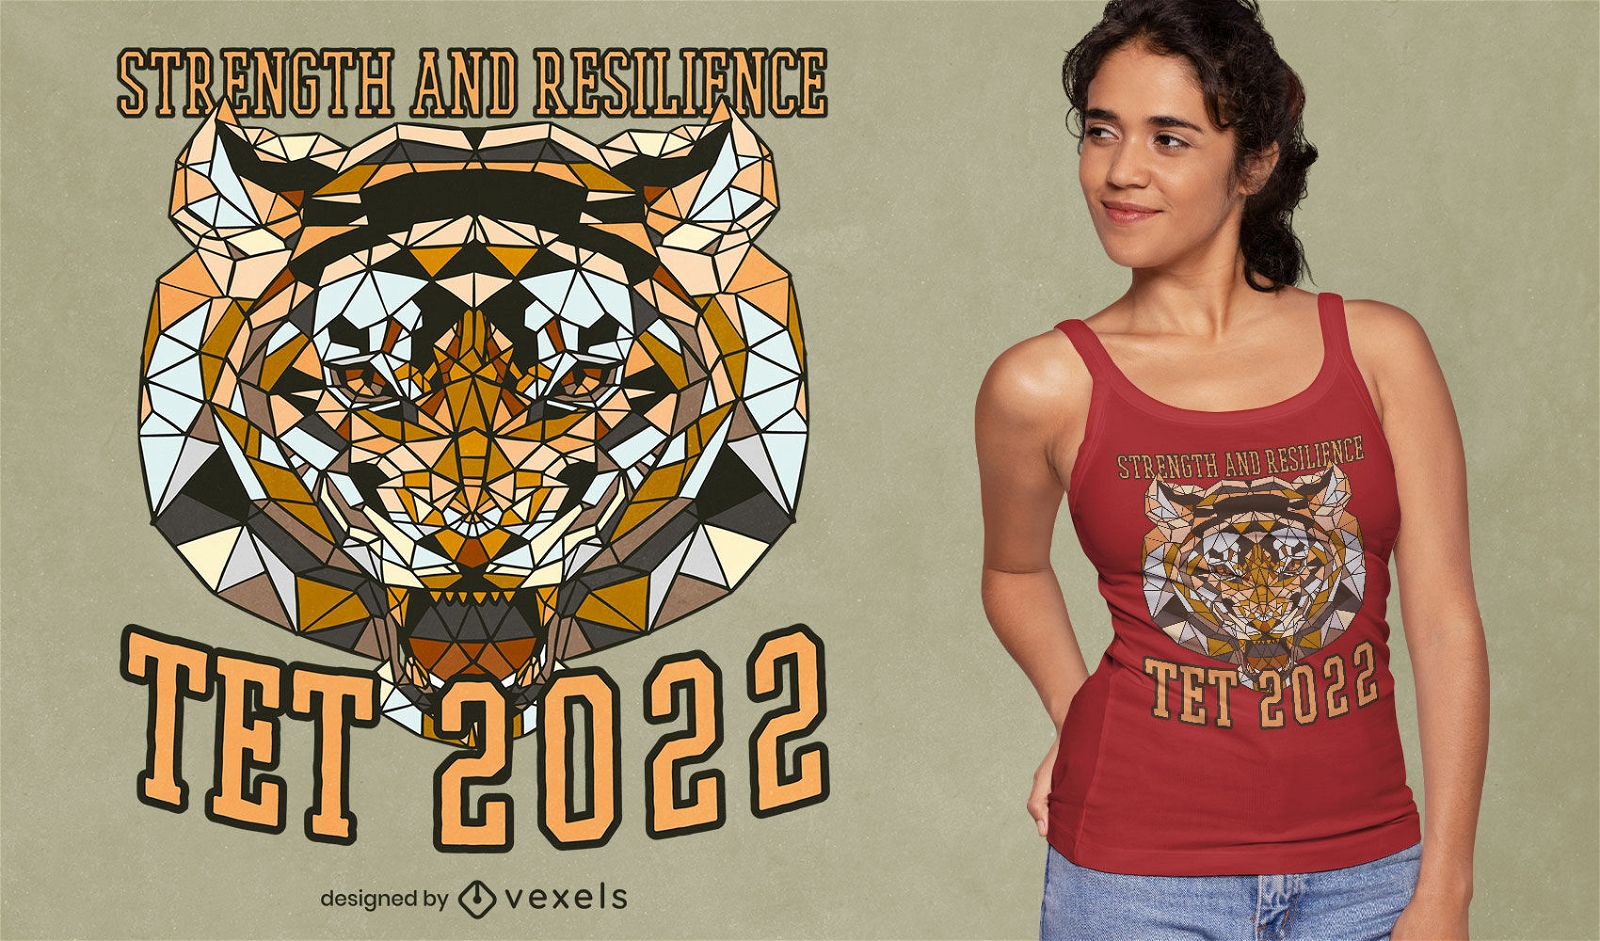 Strength and resilience tiger t-shirt design